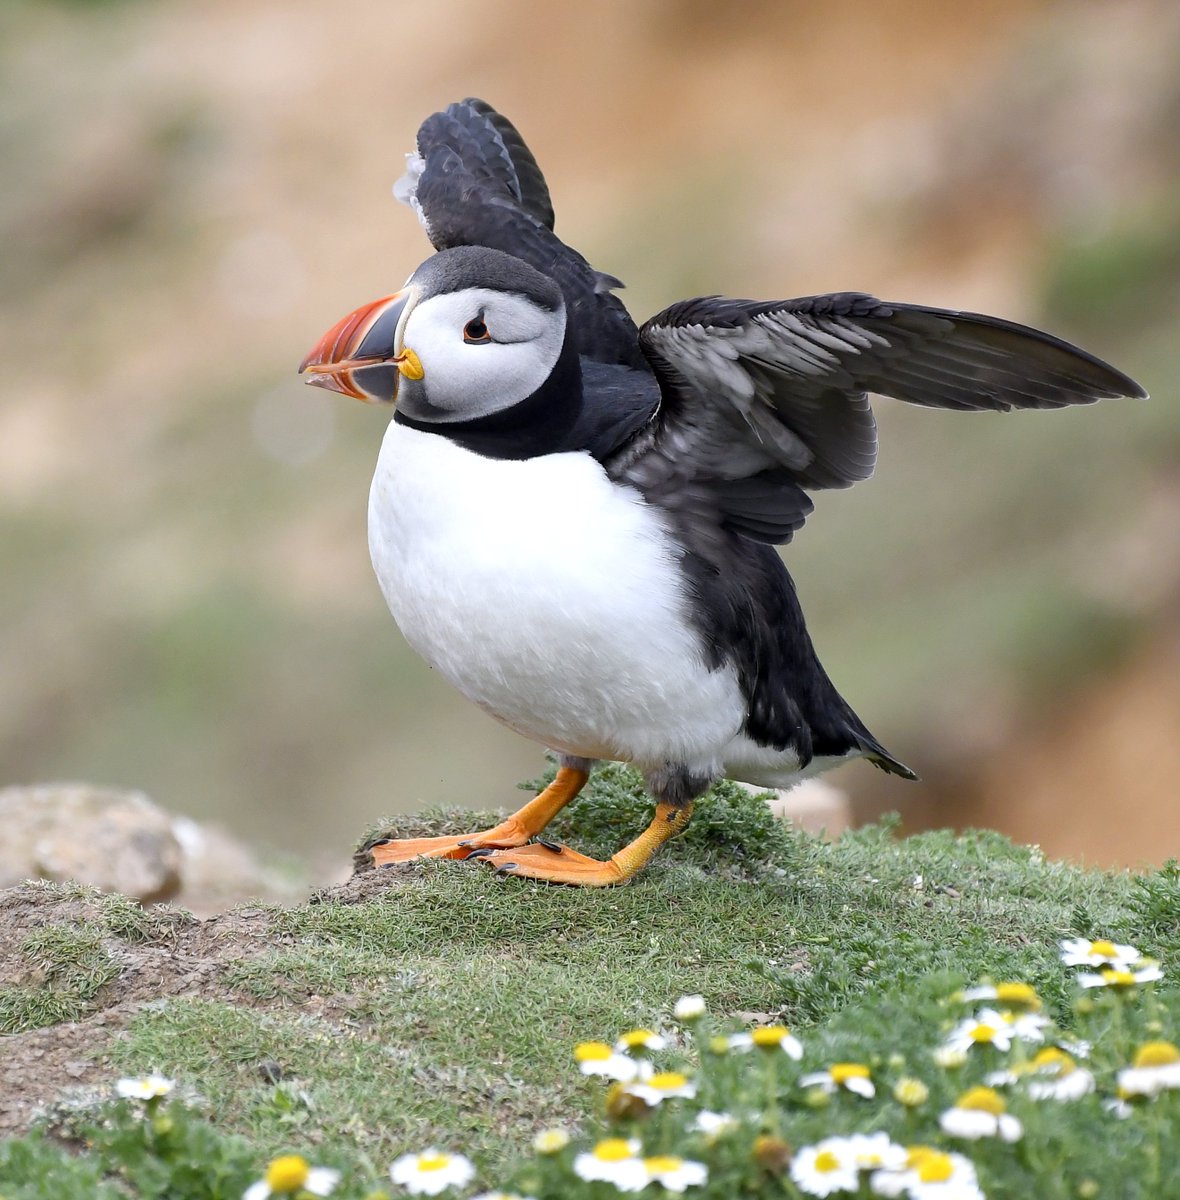 I'll be going to Skomer Island to see the Puffins again next month! 😀😍😀 Can't wait.... who's looking forward to seeing more Puffins on their feed? 😊🐦